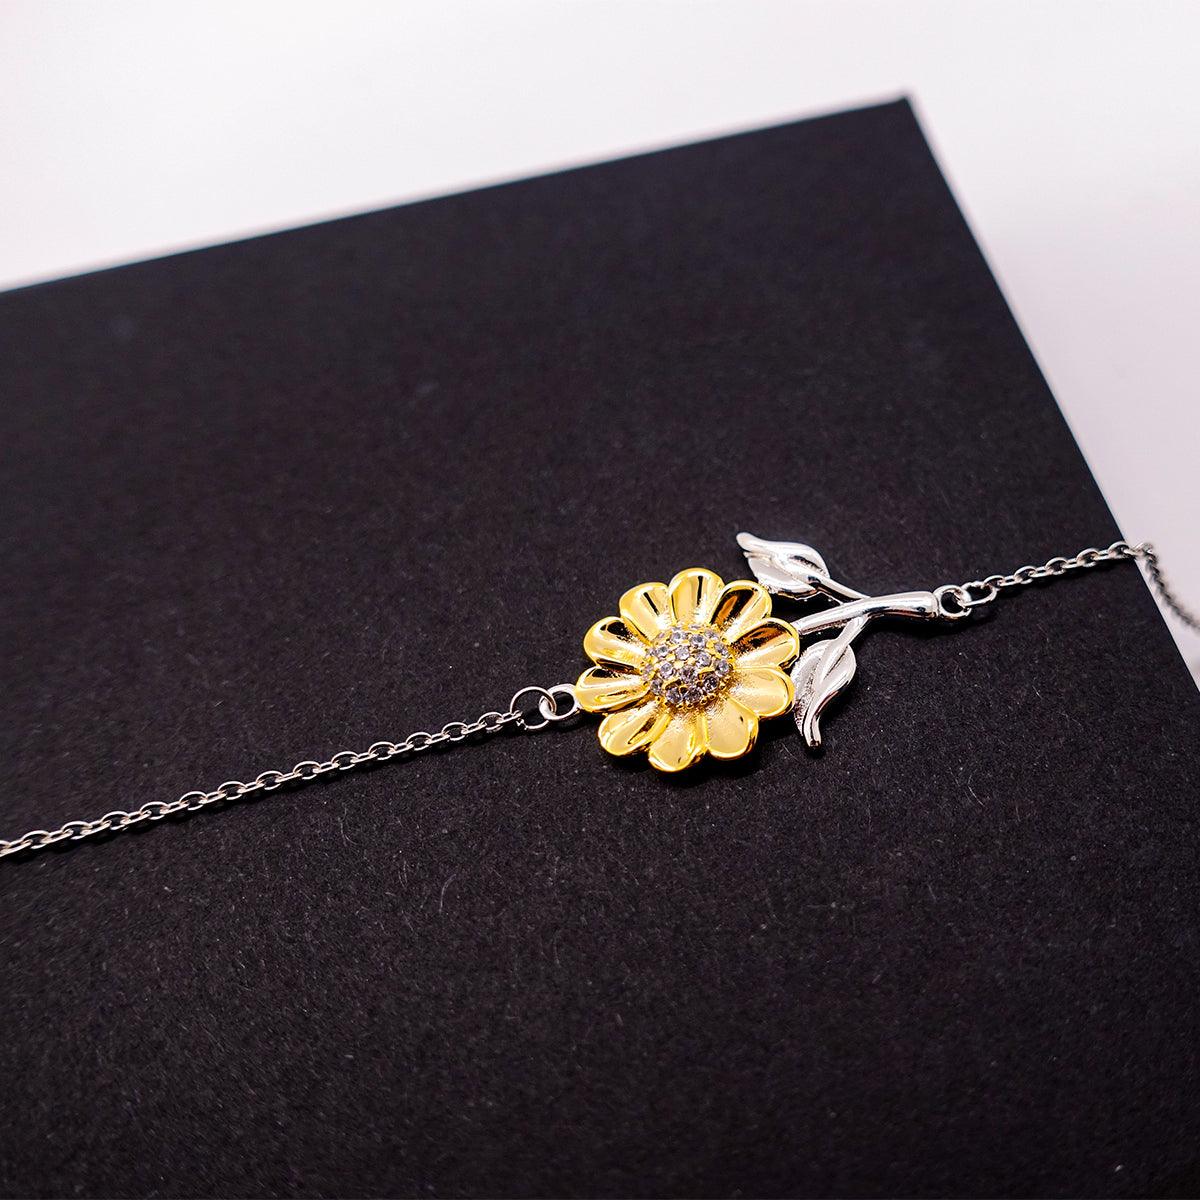 Remarkable Graphic Designer Gifts, Your dedication and hard work, Inspirational Birthday Christmas Unique Sunflower Bracelet For Graphic Designer, Coworkers, Men, Women, Friends - Mallard Moon Gift Shop